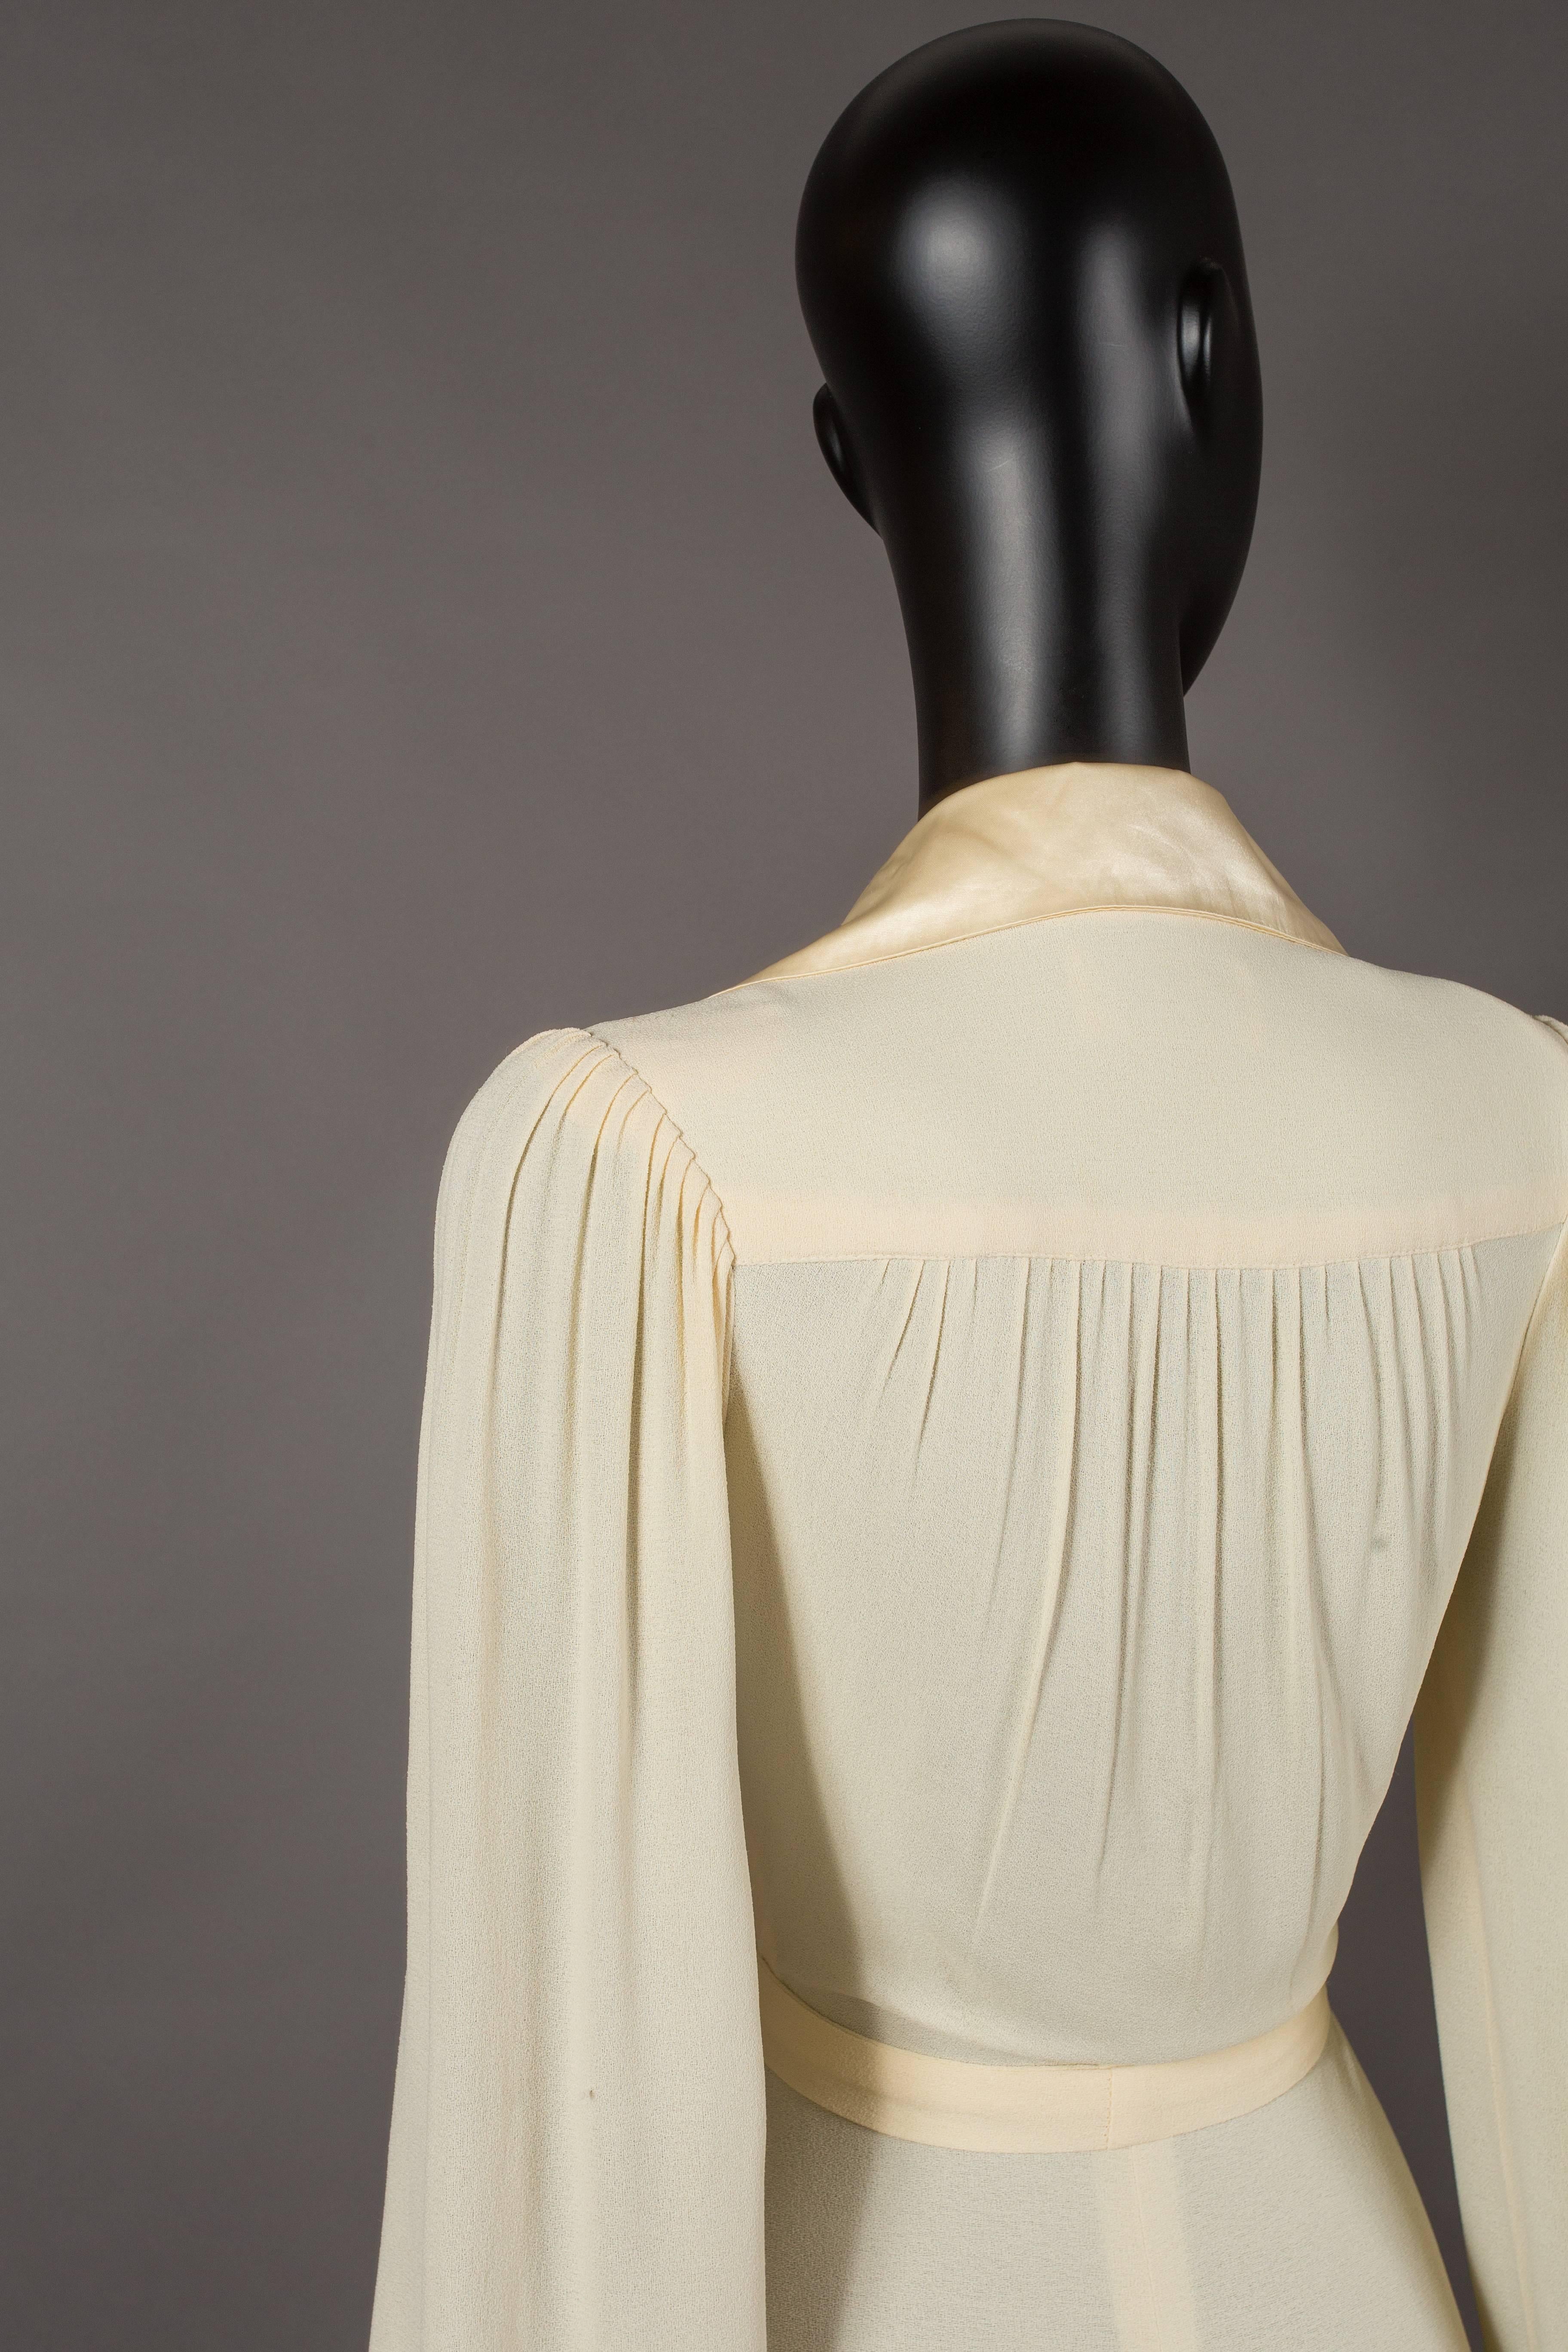 Ossie Clark ivory moss crepe collared evening dress with satin trim, circa 1974 1